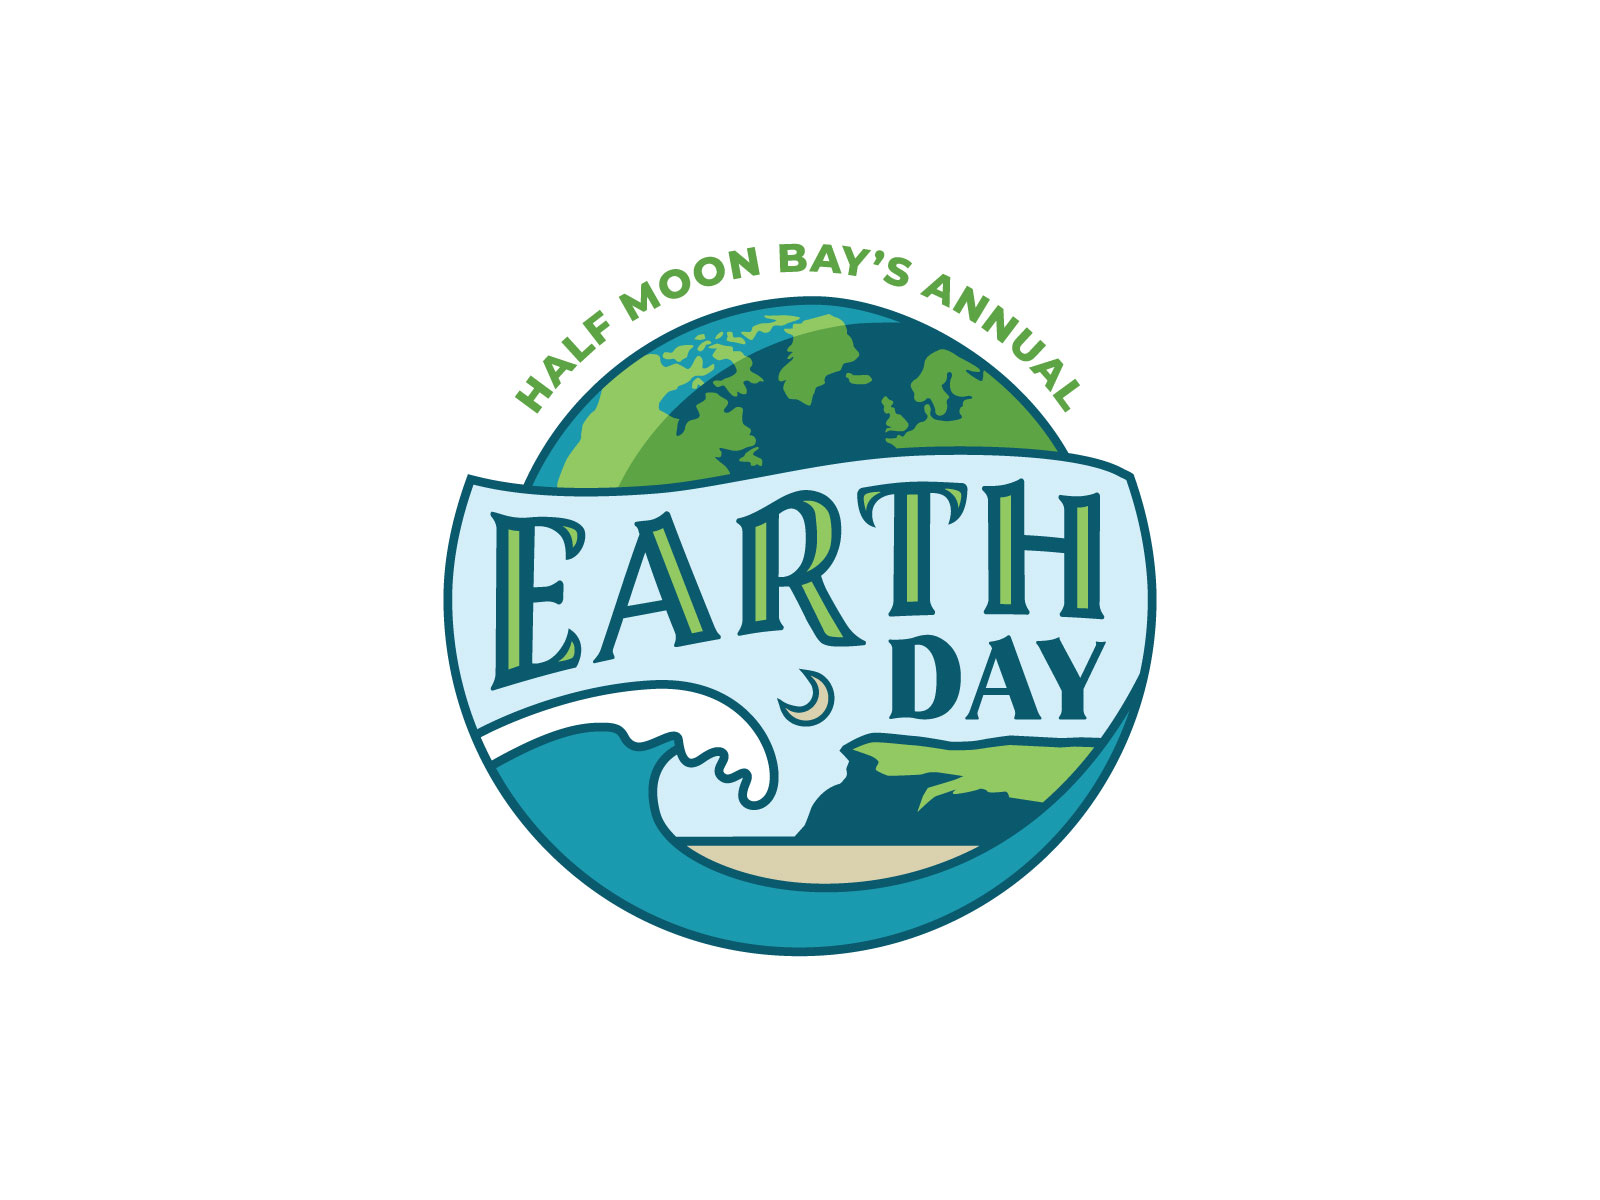 Earth Day Event Logo by Laura Acton on Dribbble